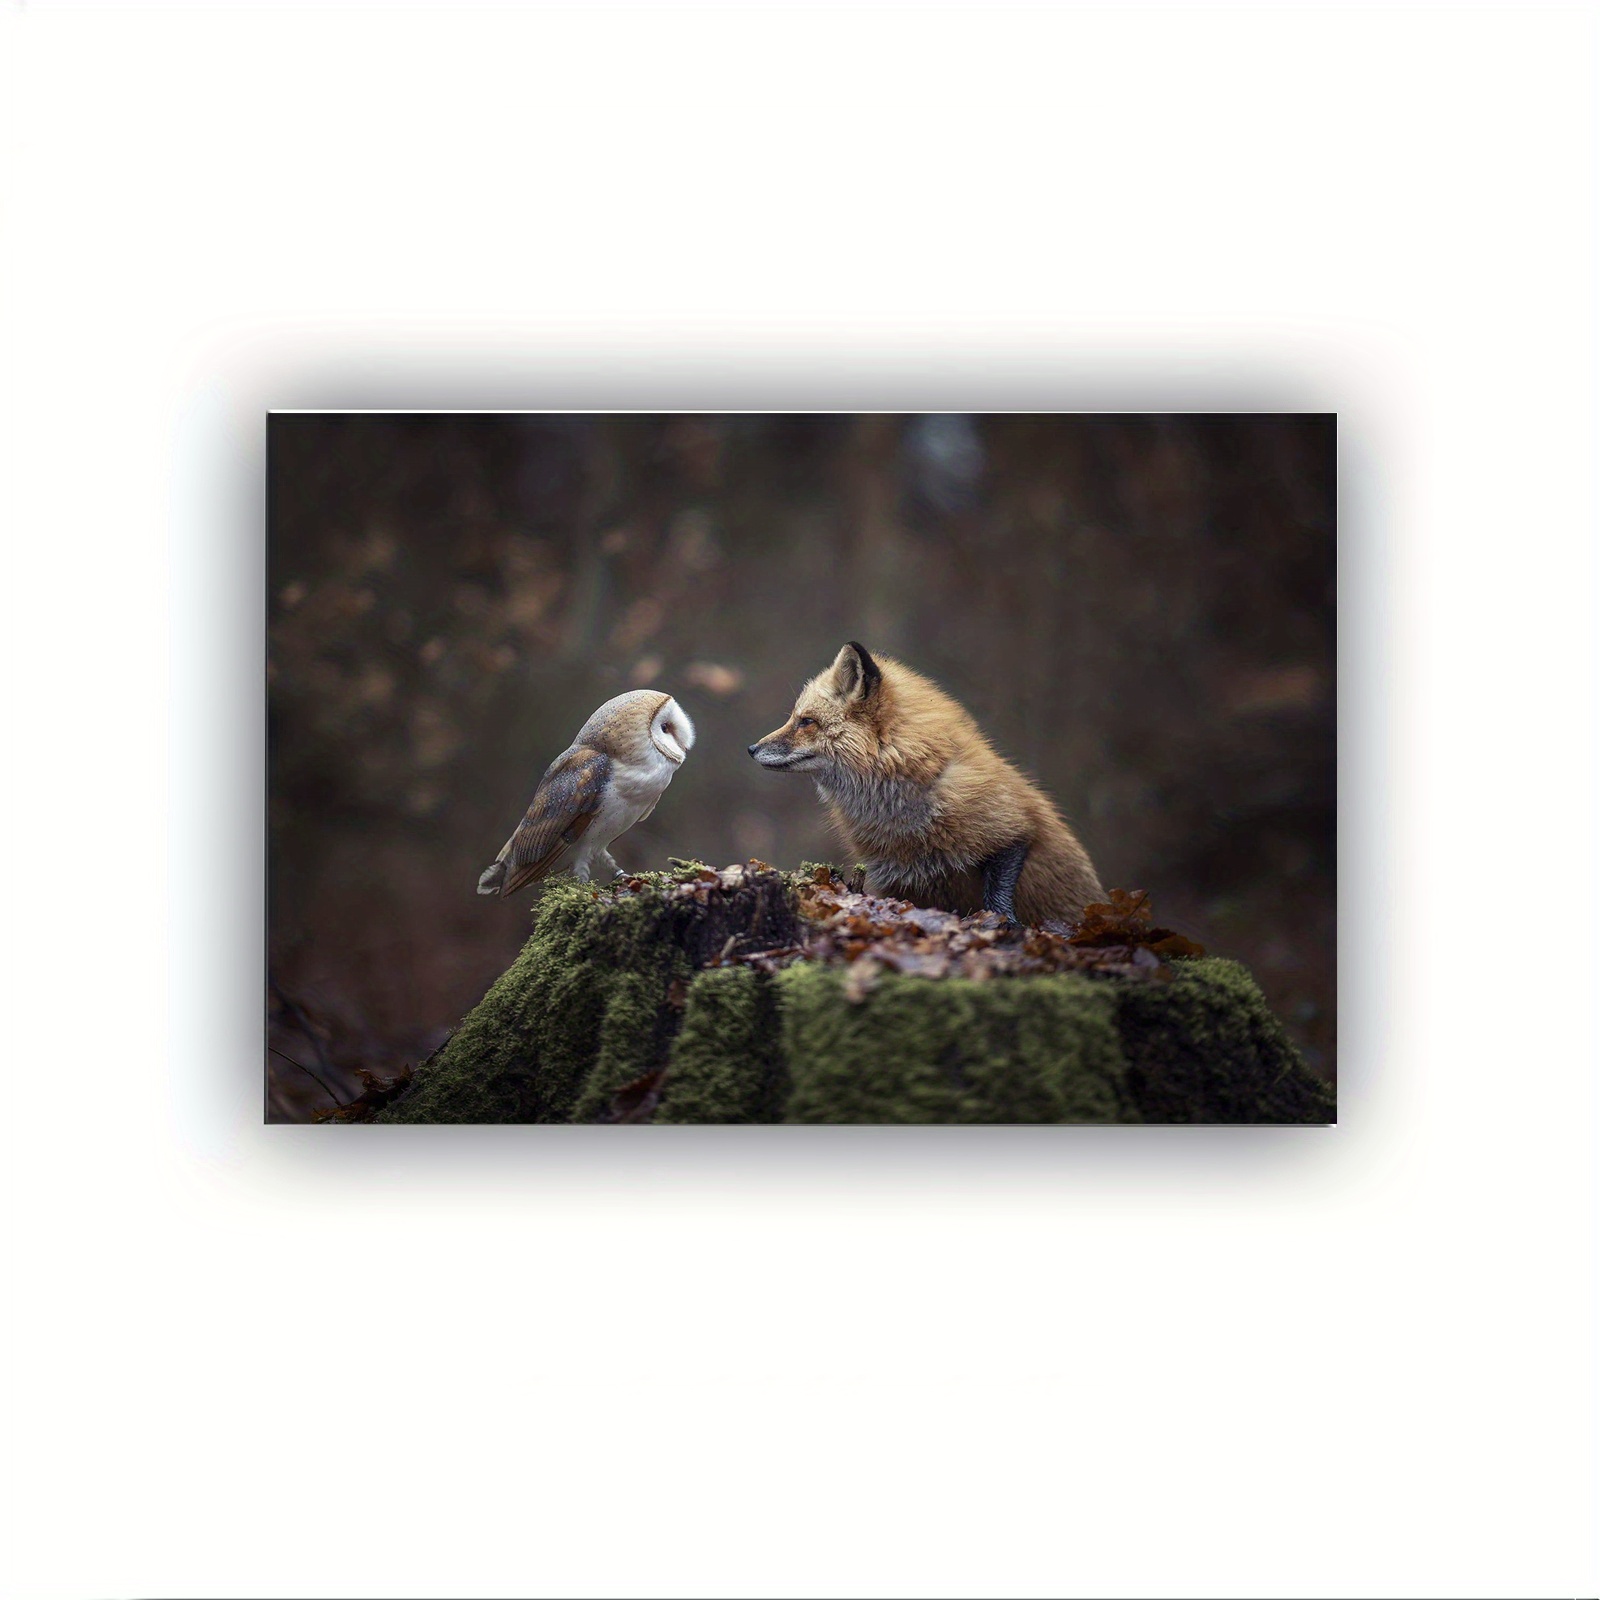 

1 Pc Wooden Framed Wall Art, Wildlife Owl And Fox - Canvas Printing Poster, Artwork Wall Painting For Gift, Home Living Room Office Cafe Wall Decor, Perfect Gift And Home Decoration